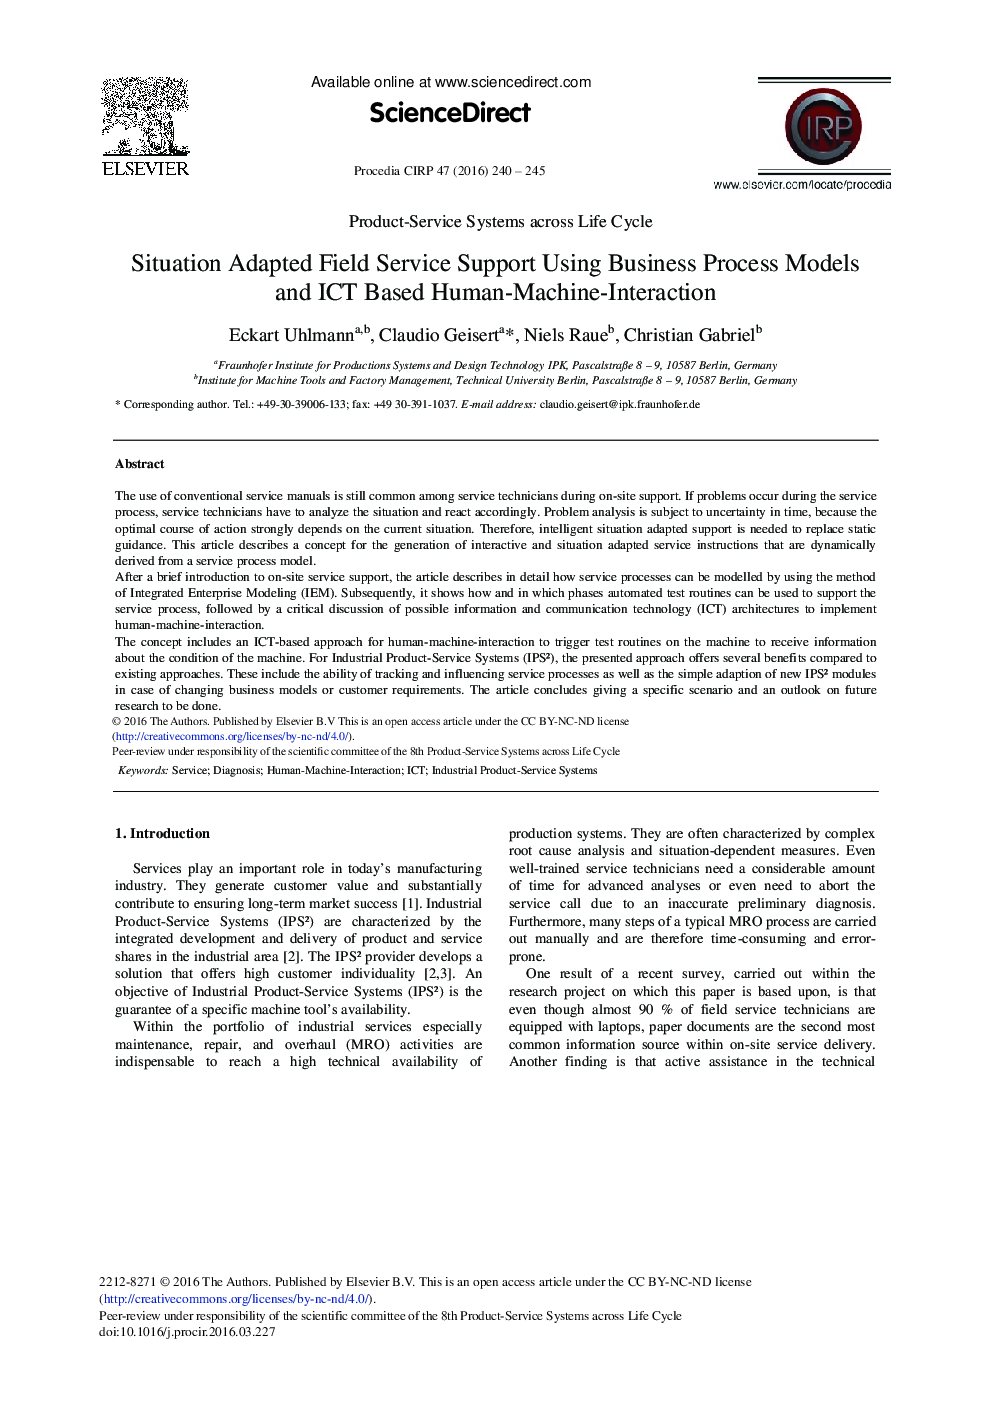 Situation Adapted Field Service Support Using Business Process Models and ICT Based Human-Machine-Interaction 